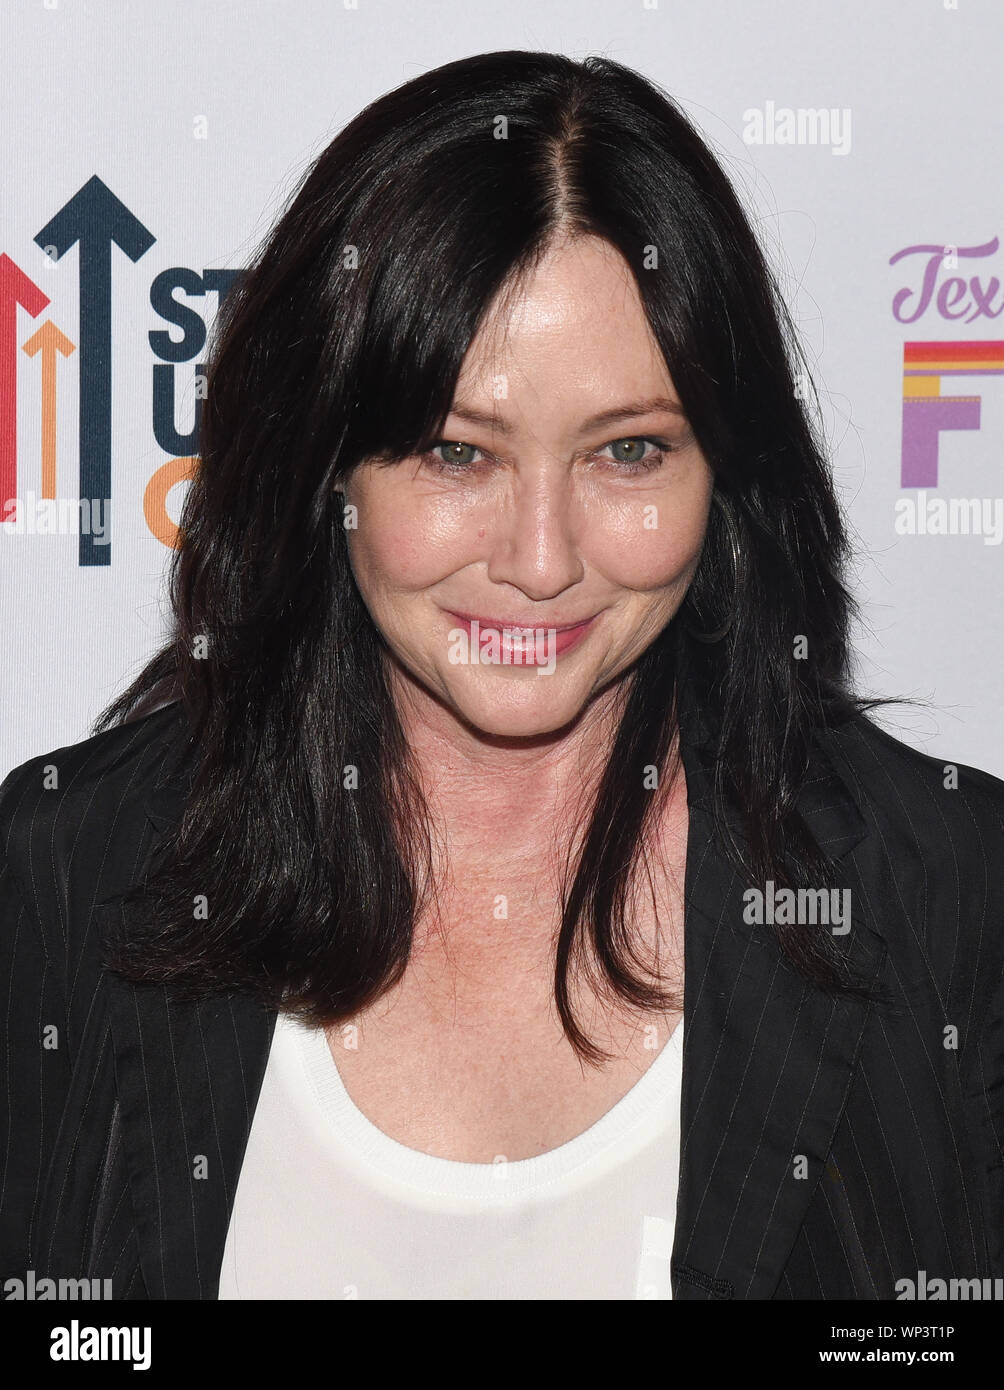 Shannon pictures daughtery of Shannen Doherty